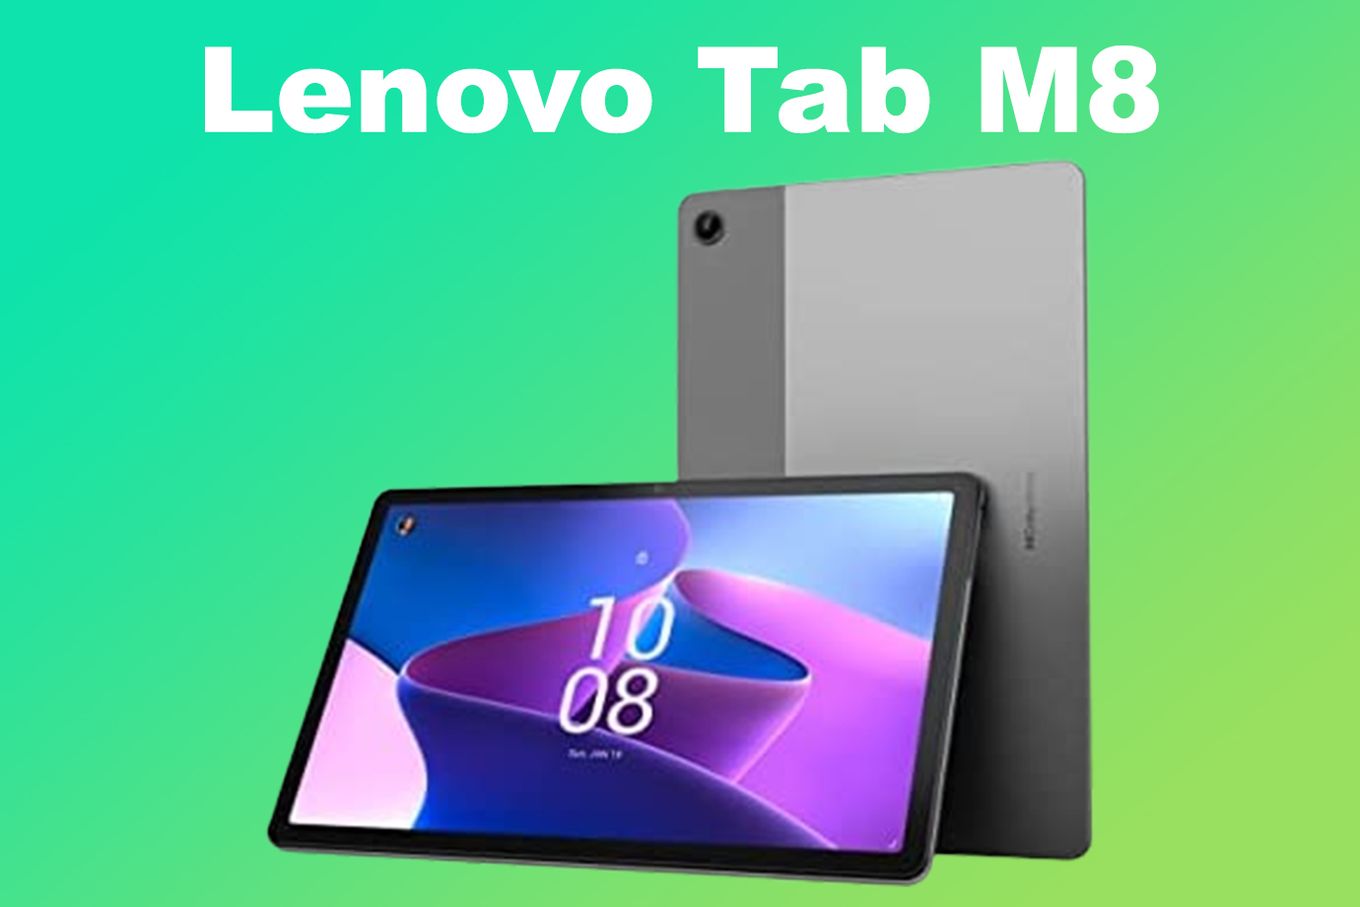 Roblox for Lenovo Tab 4 10 - free download APK file for Tab 4 10